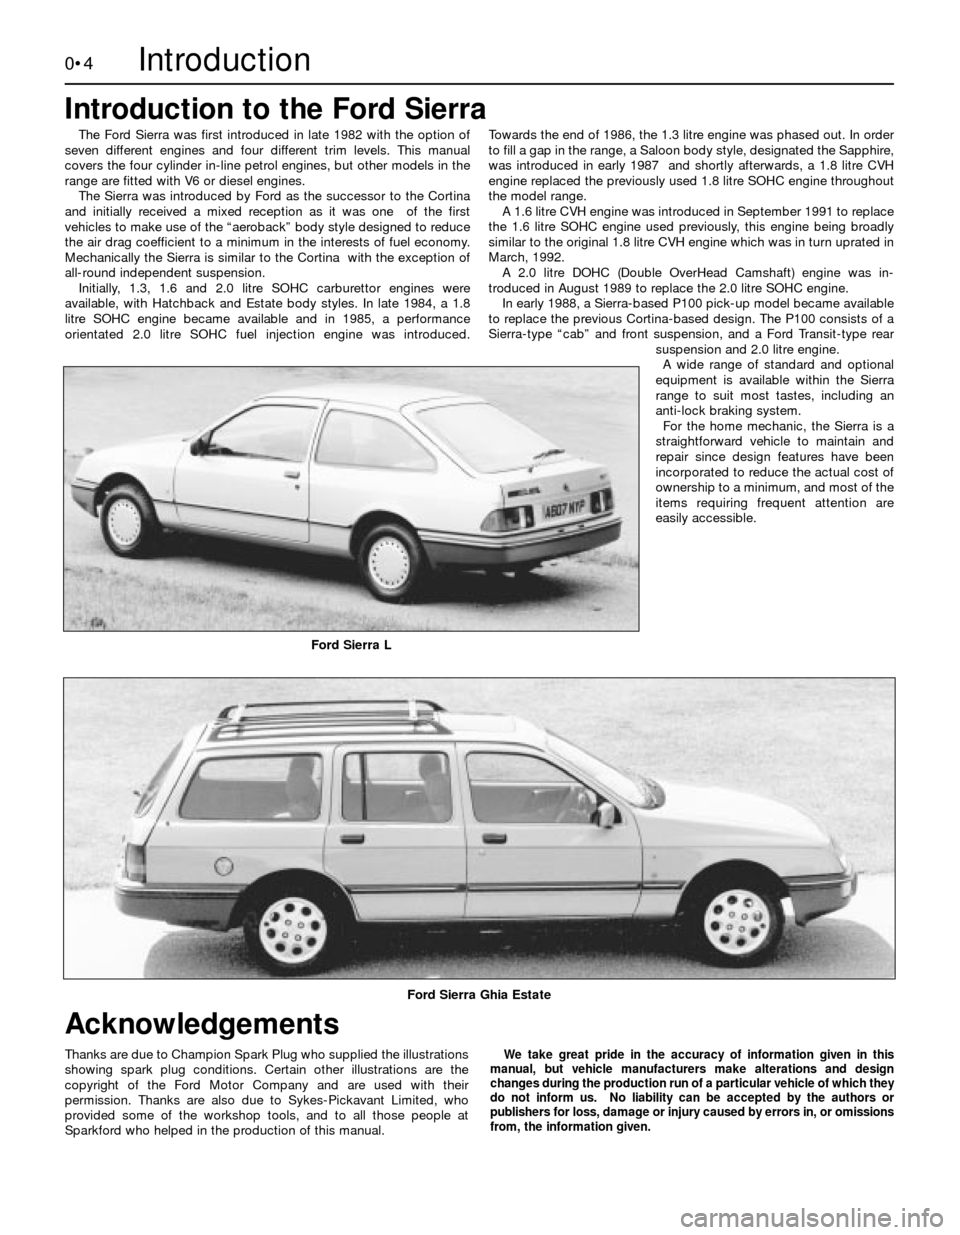 FORD SIERRA 1987 2.G Introduction Workshop Manual 0•4
The Ford Sierra was first introduced in late 1982 with the option of
seven different engines and four different trim levels. This manual
covers the four cylinder in-line petrol engines, but othe